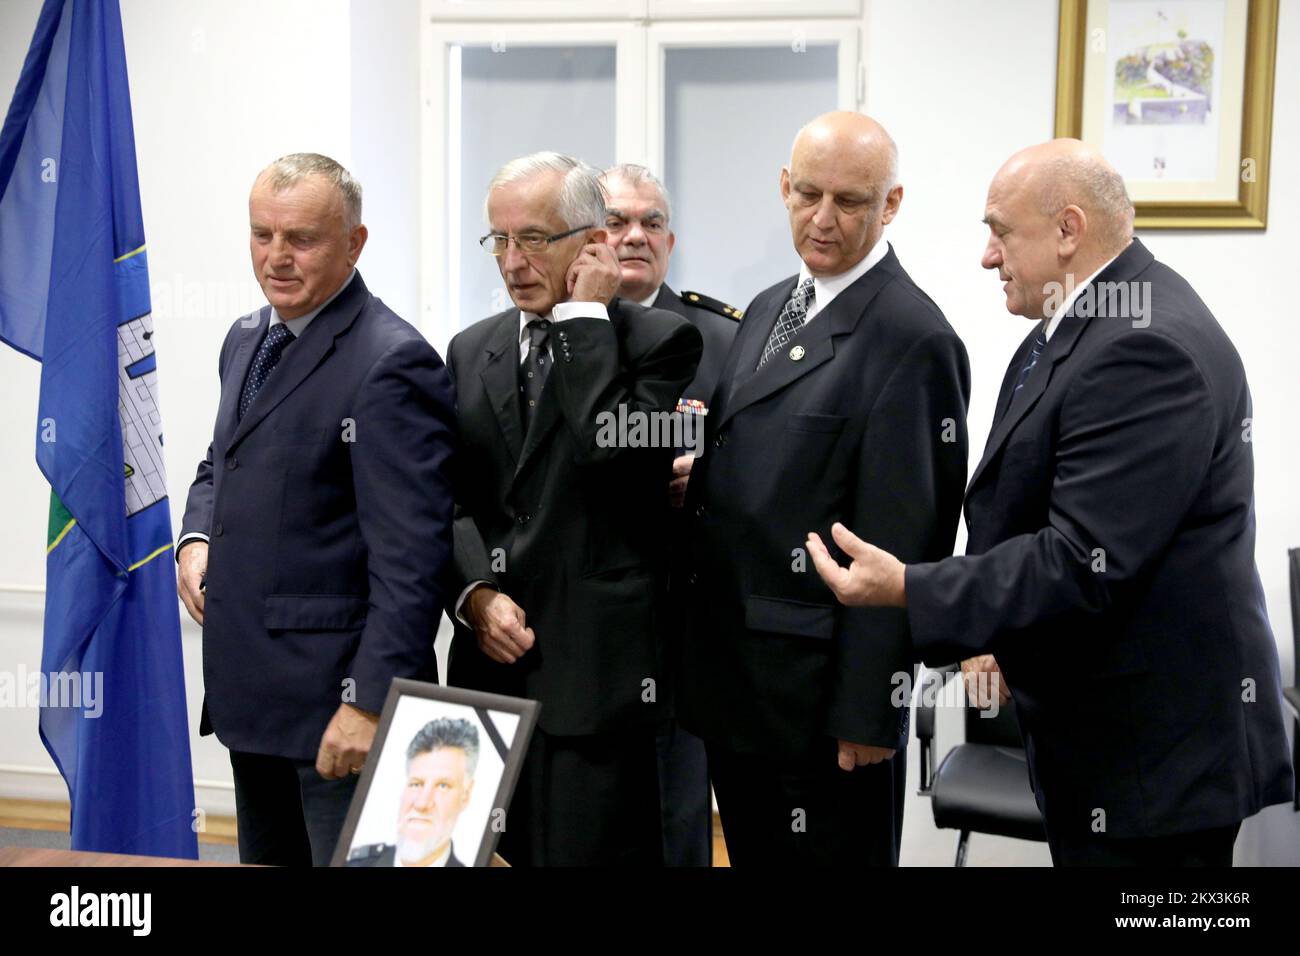 01.12.2017., Zagreb, Croatia - The Croatian Generala Association has opened a mourning book for death of Slobodan Praljak, who died after appearing to drink poison at court in The Hague as UN judges upheld his 20-year sentence. Ljubo Cesic Rojs, Josip Lucic. Photo: Patrik Macek/PIXSELL Stock Photo